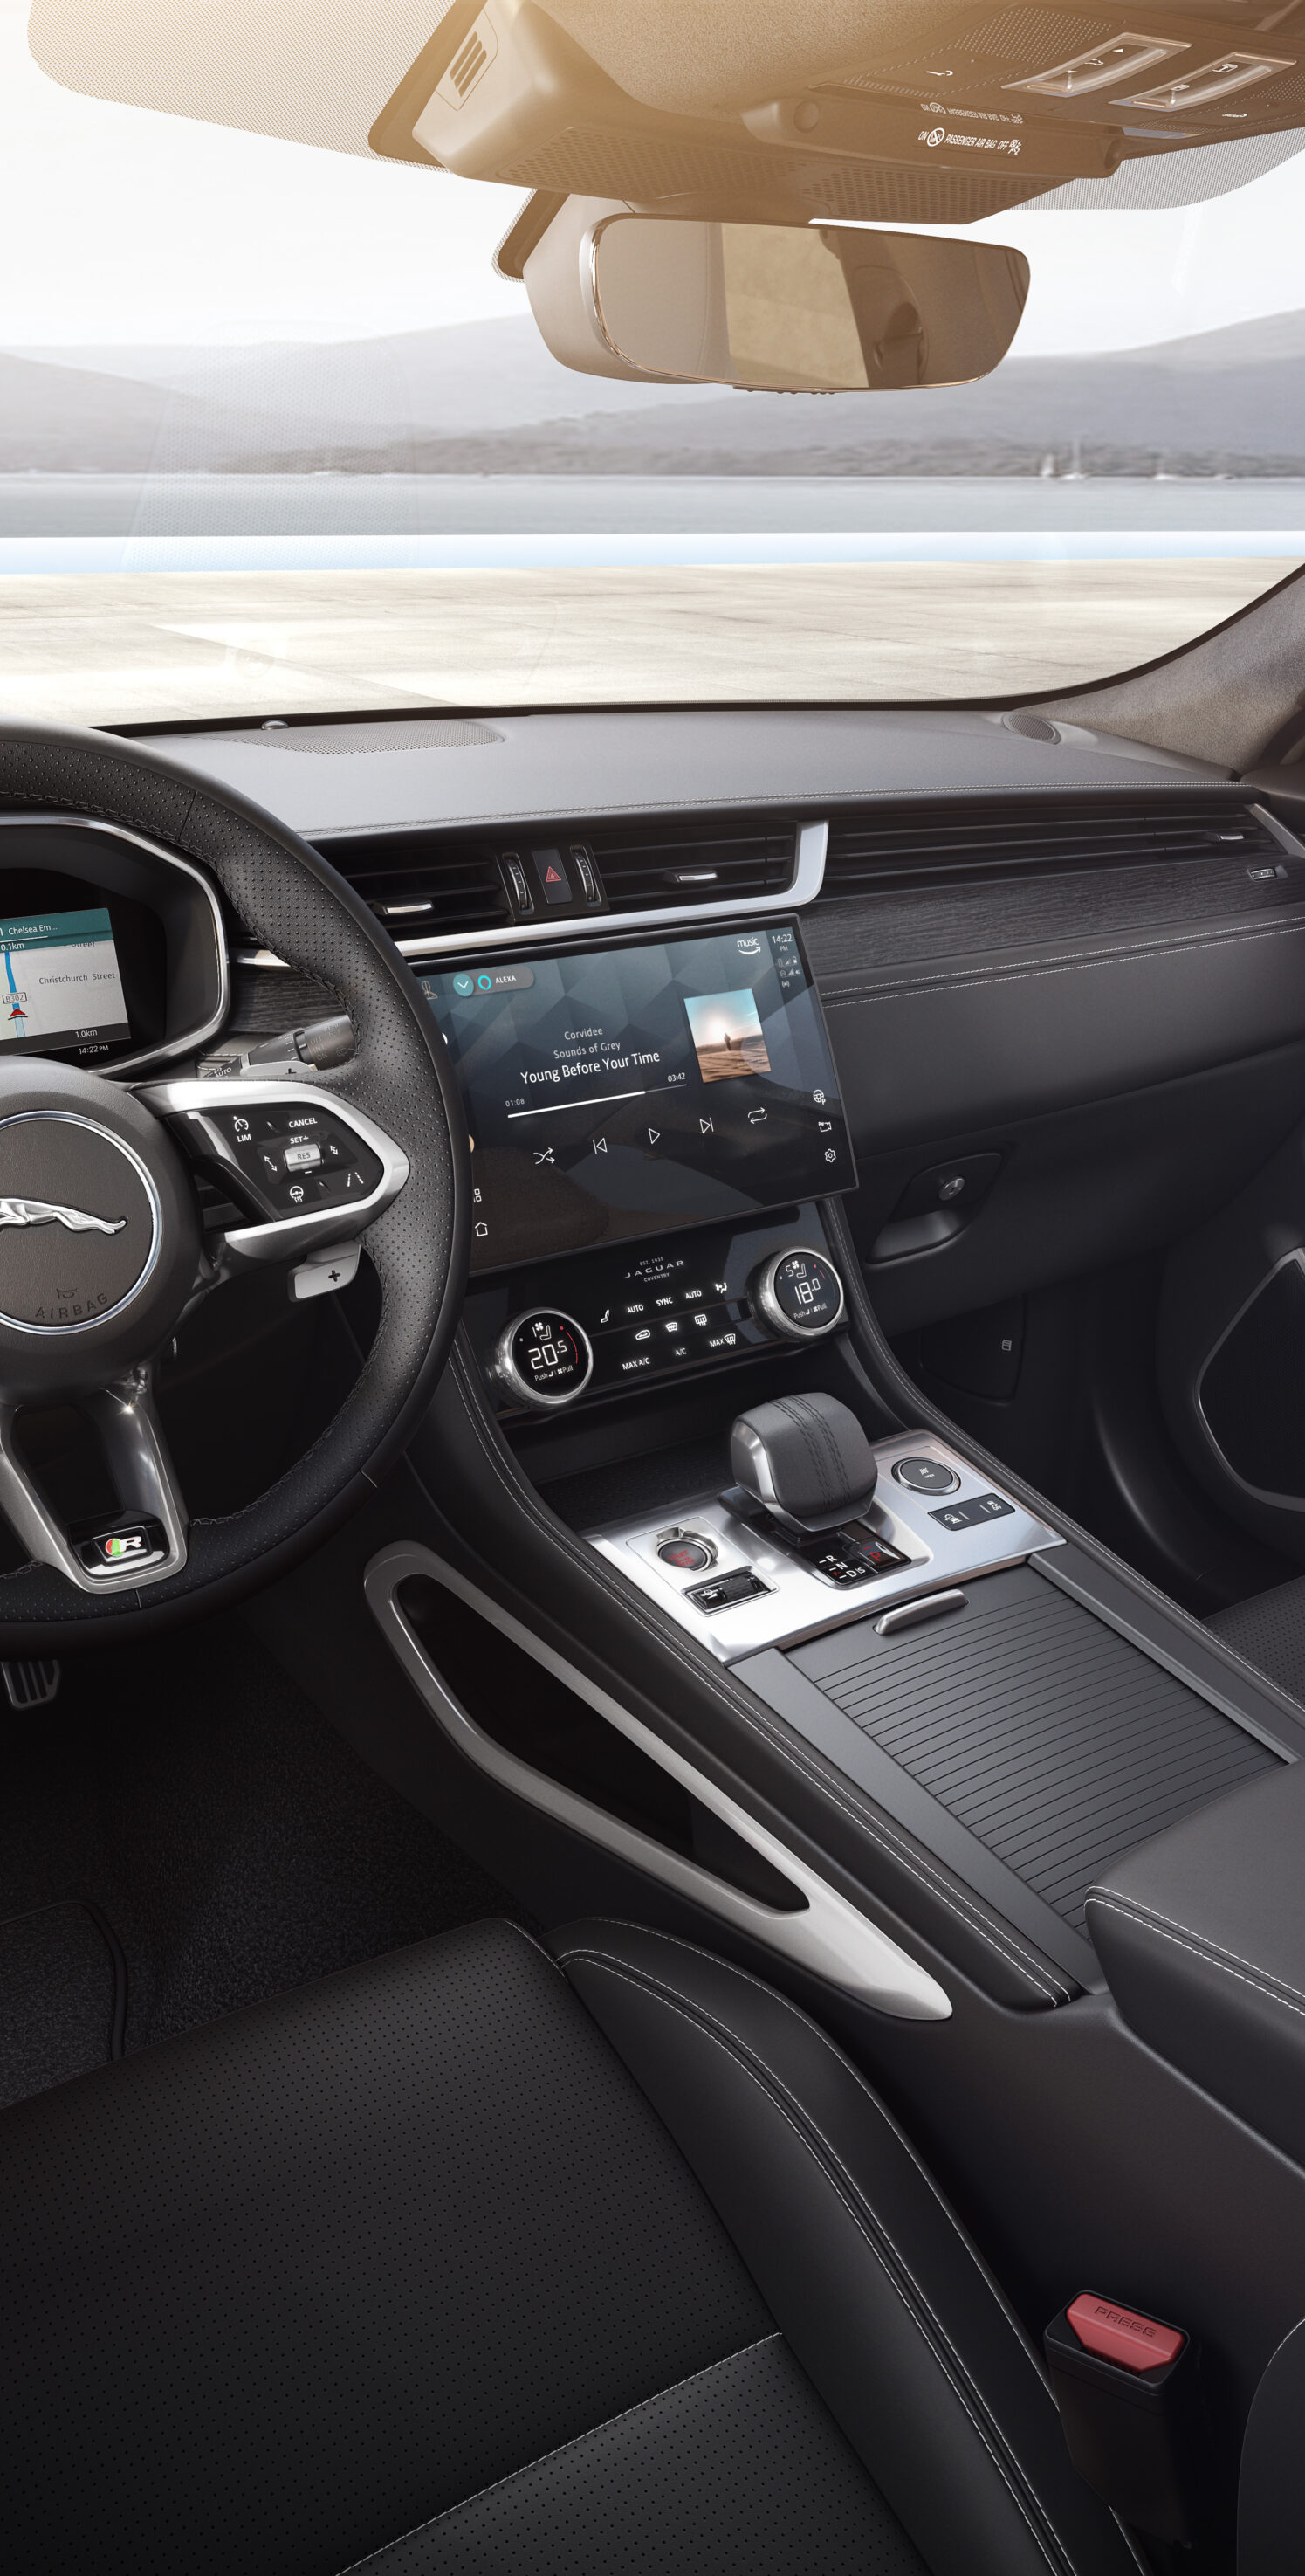 https://autofilter.sk/assets/images/f-pace/gallery/Jaguar_F-PACE_23MY_400_SPORT_Interior_Front_View_120422.jpg - obrazok